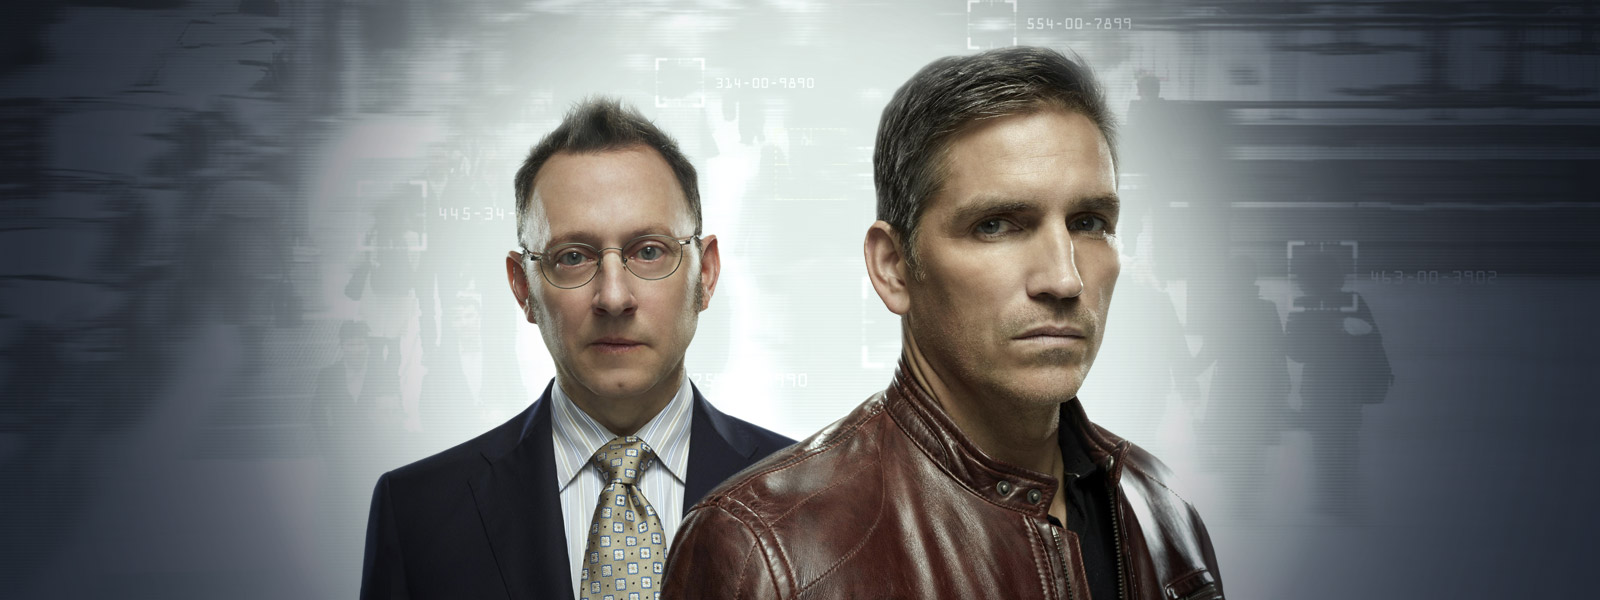 Review: Person of Interest 4.03 “Wingman”